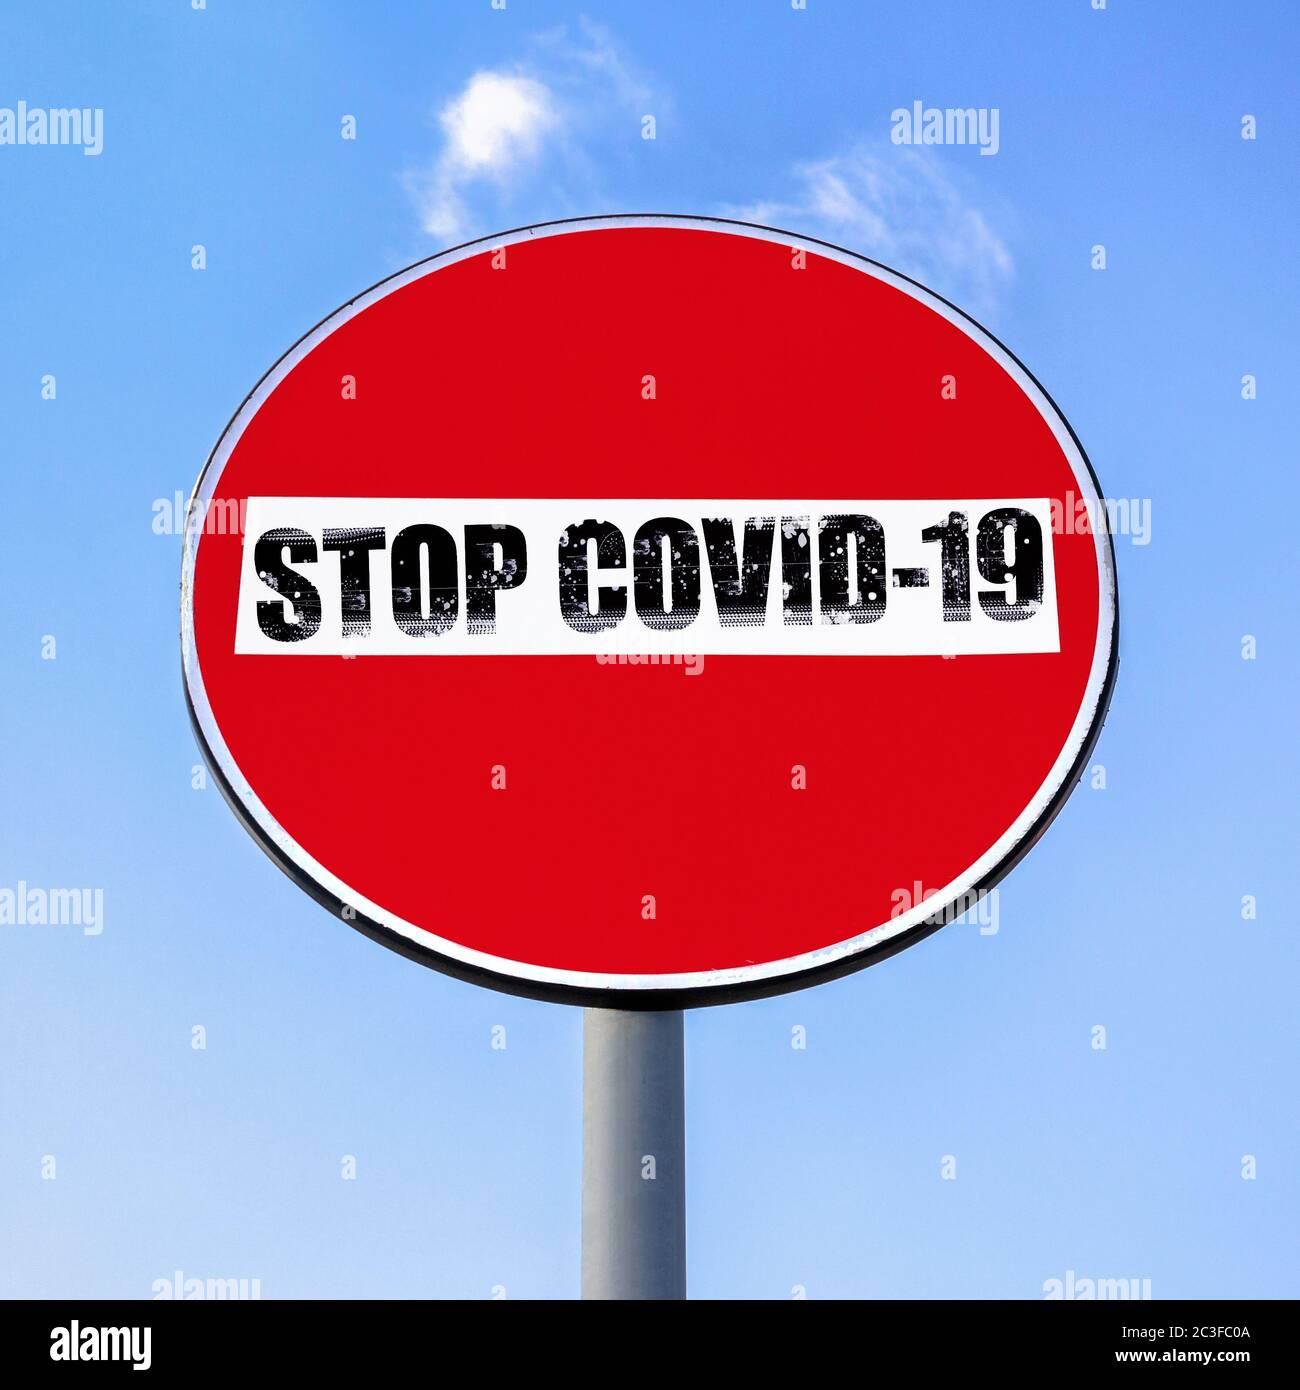 No access denied road sign with message STOP COVID-19 Stock Photo